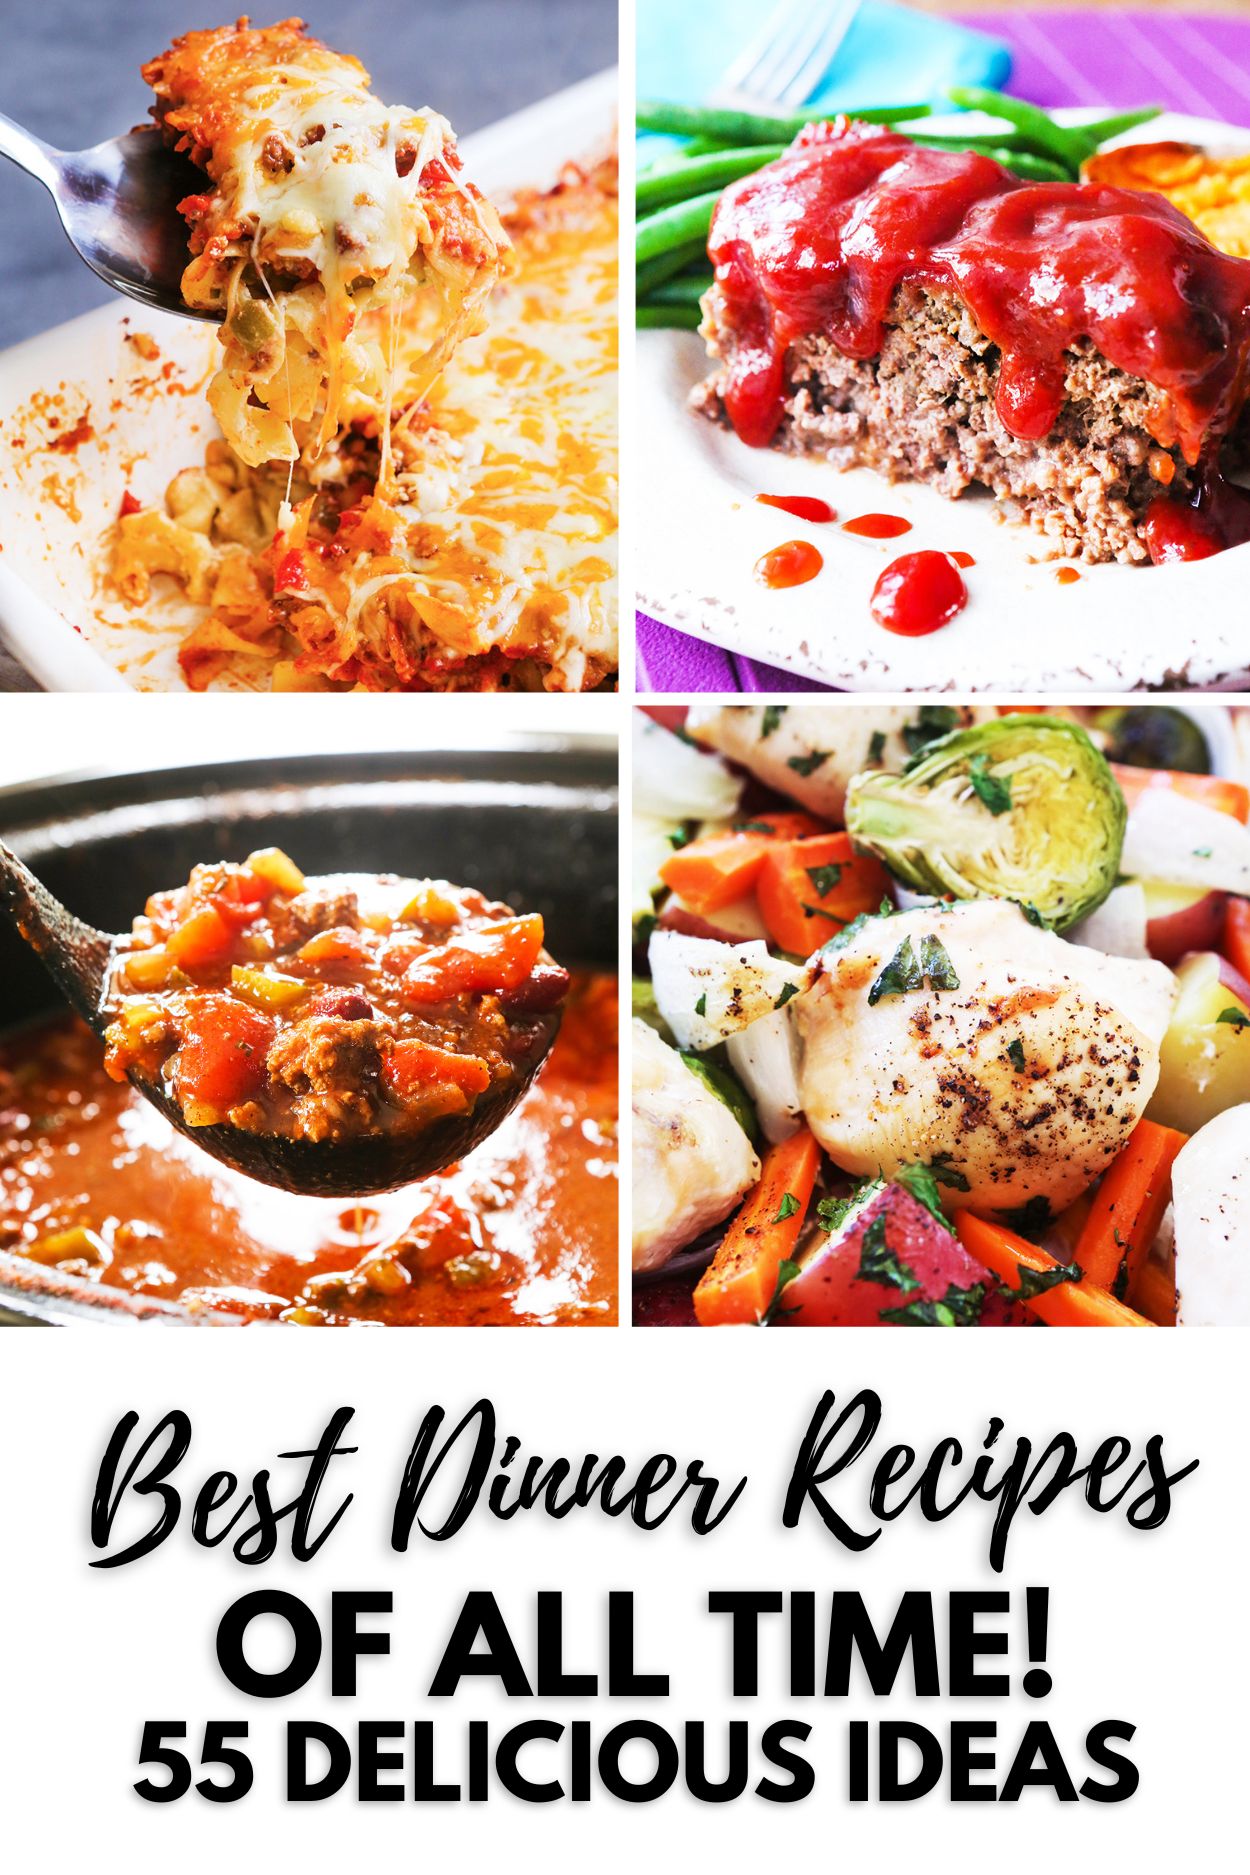 Four food photos in a grid with text below reading "Best Dinner Recipes of all time! 55 delicious ideas."